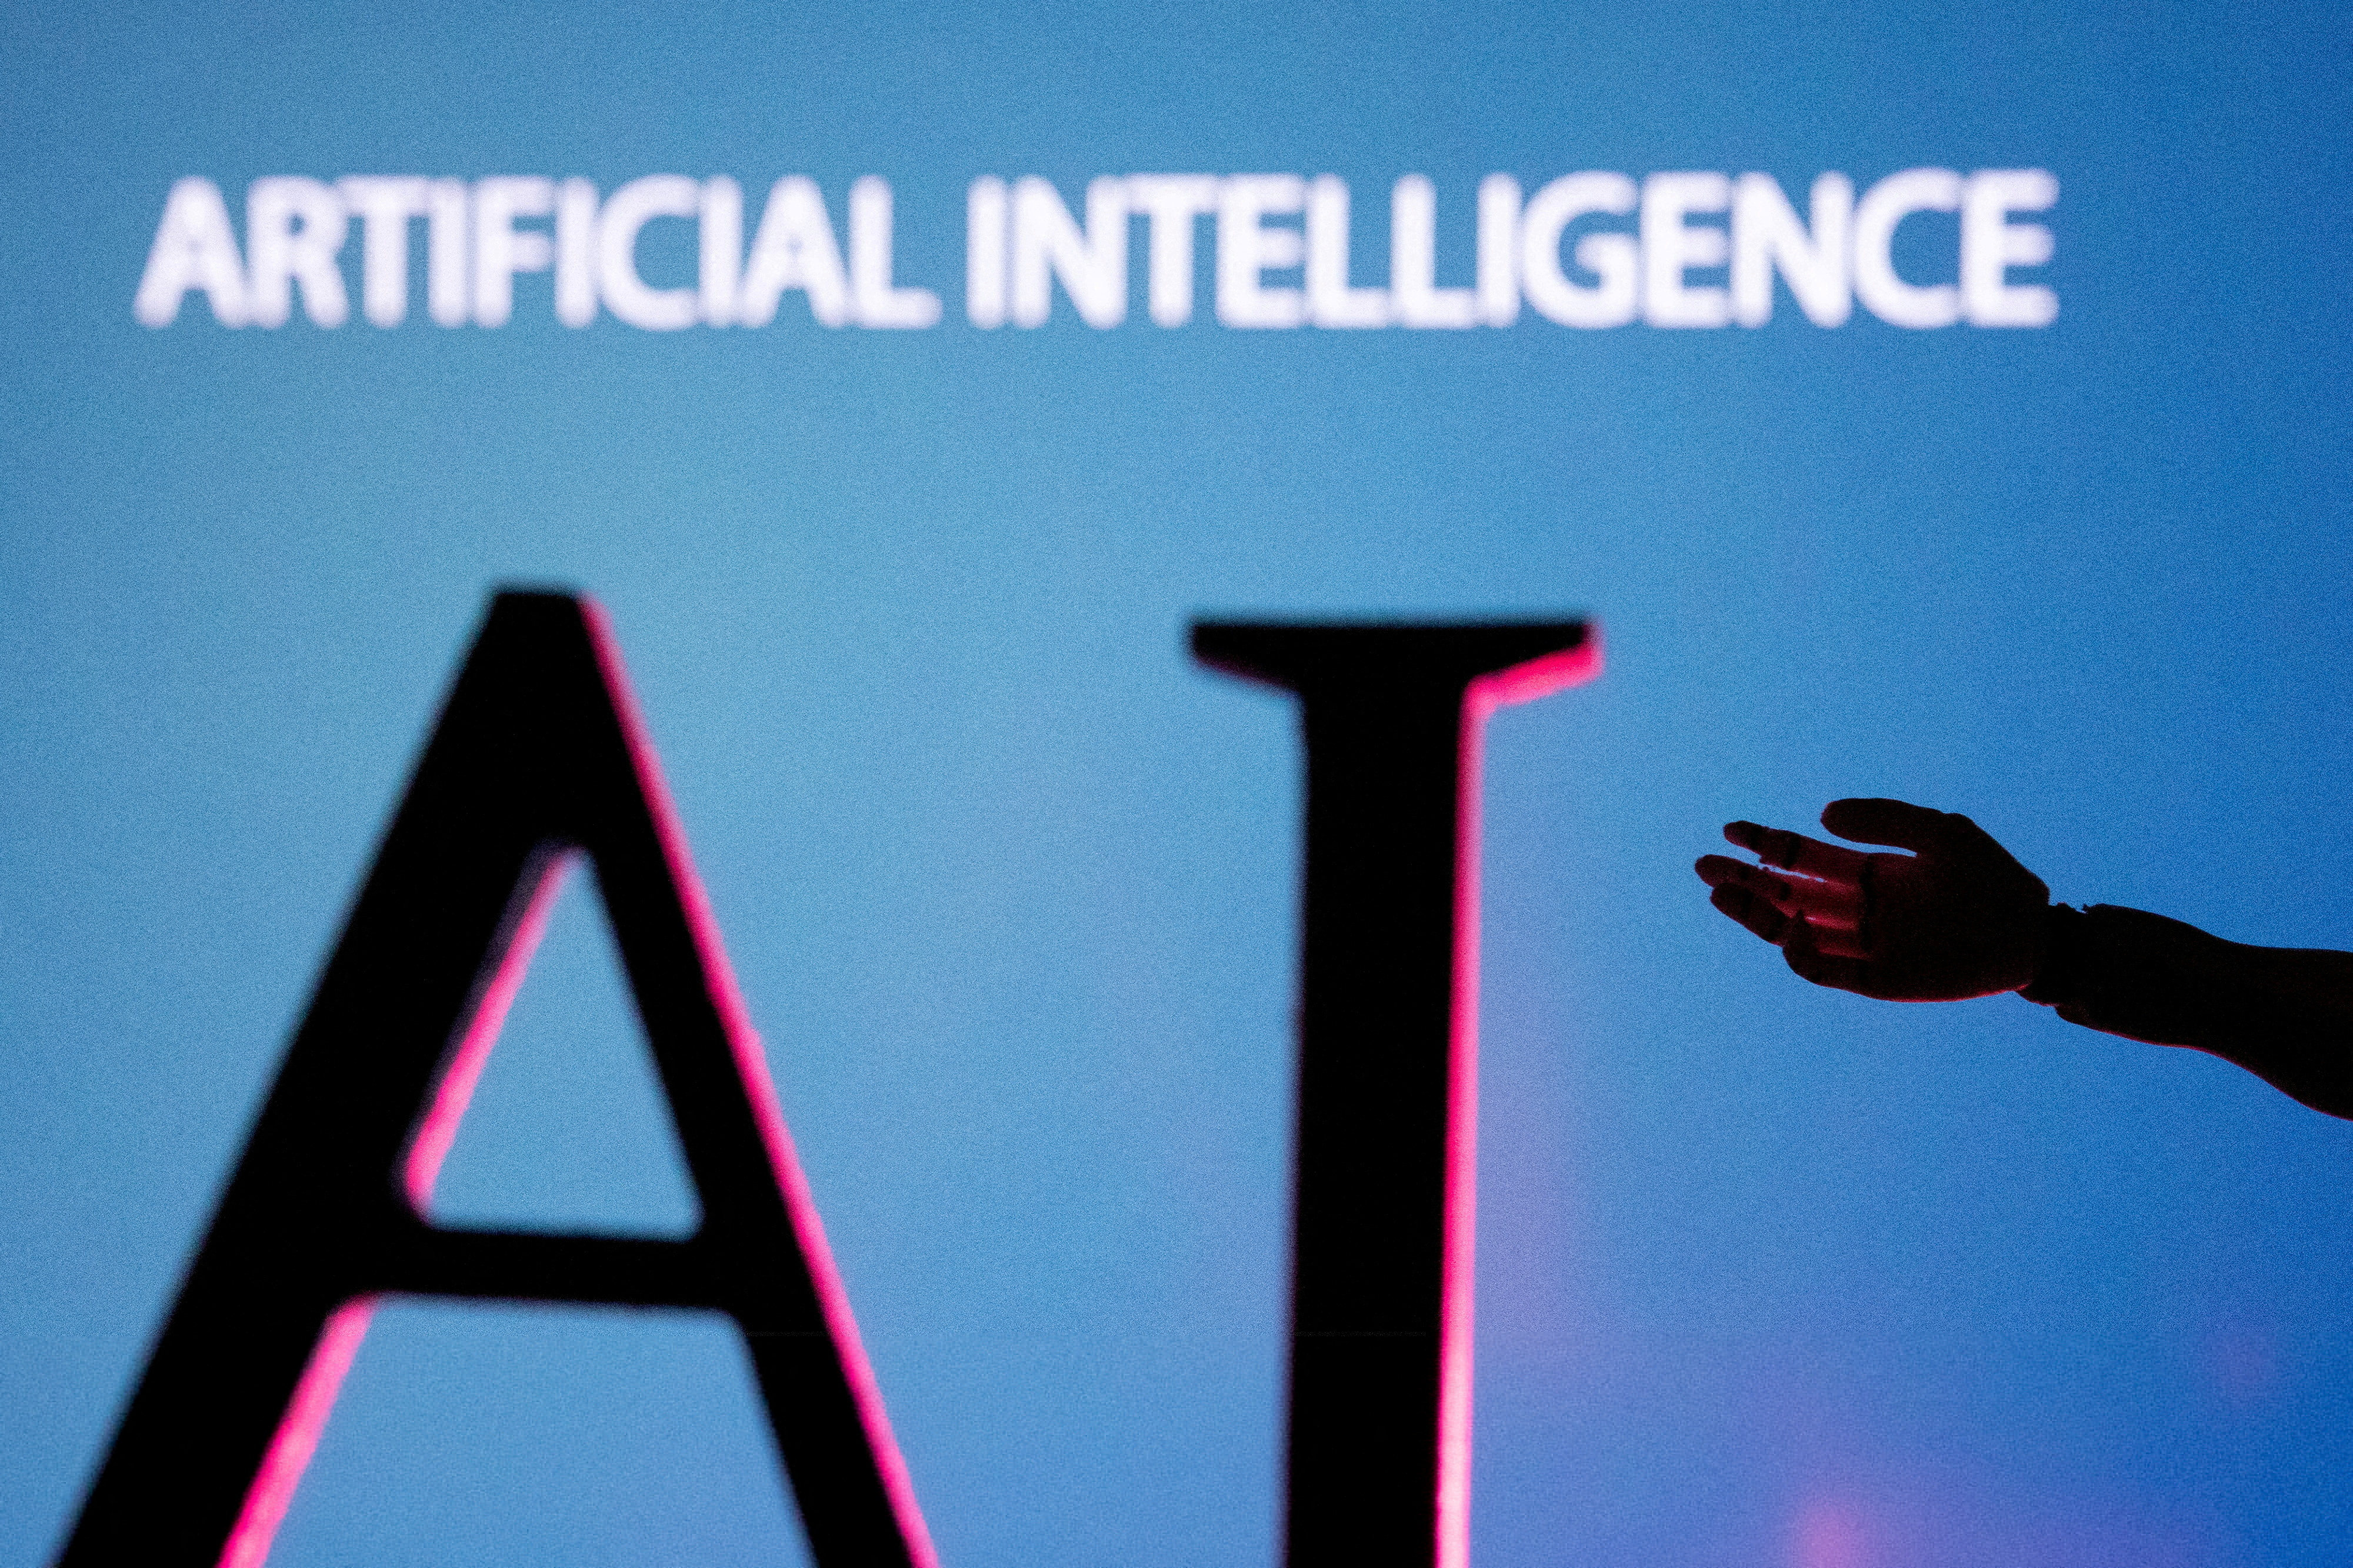 Staff researchers sent the OpenAI board a letter warning of an AI discovery that could threaten humanity, sources say. Photo: Reuters